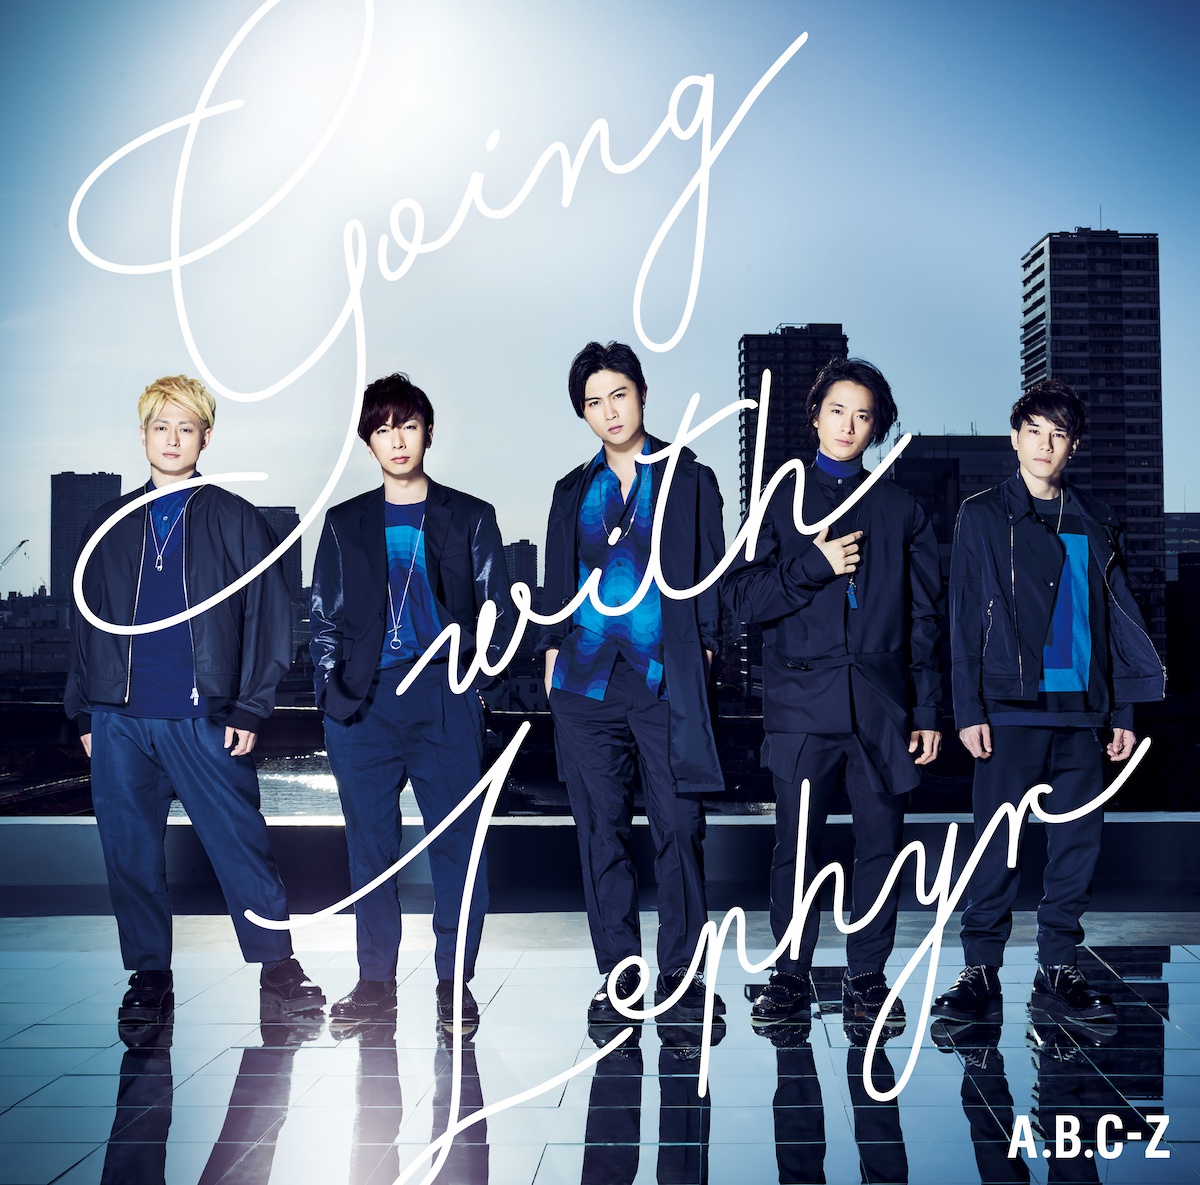 『A.B.C-Z - Welcome to the Night 歌詞』収録の『Going with Zephyr』ジャケット